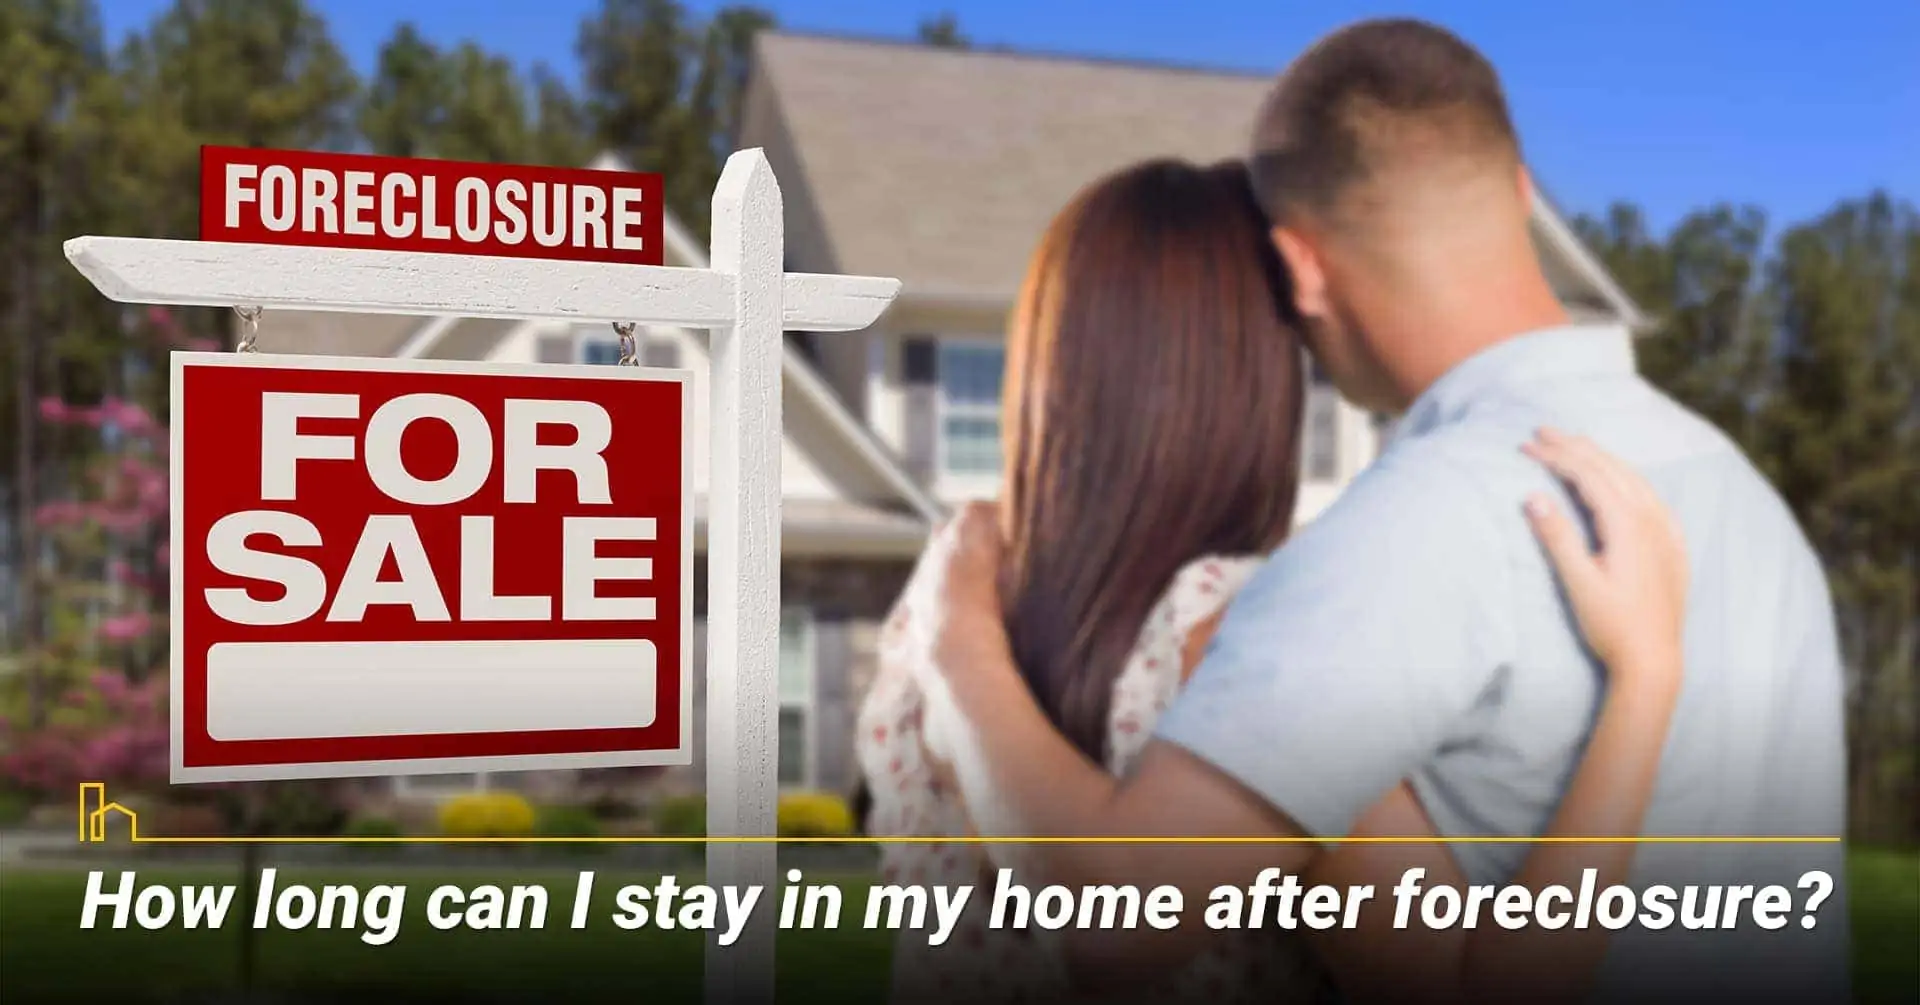 How long can I stay in my home after foreclosure? stay in your home during the foreclosure process